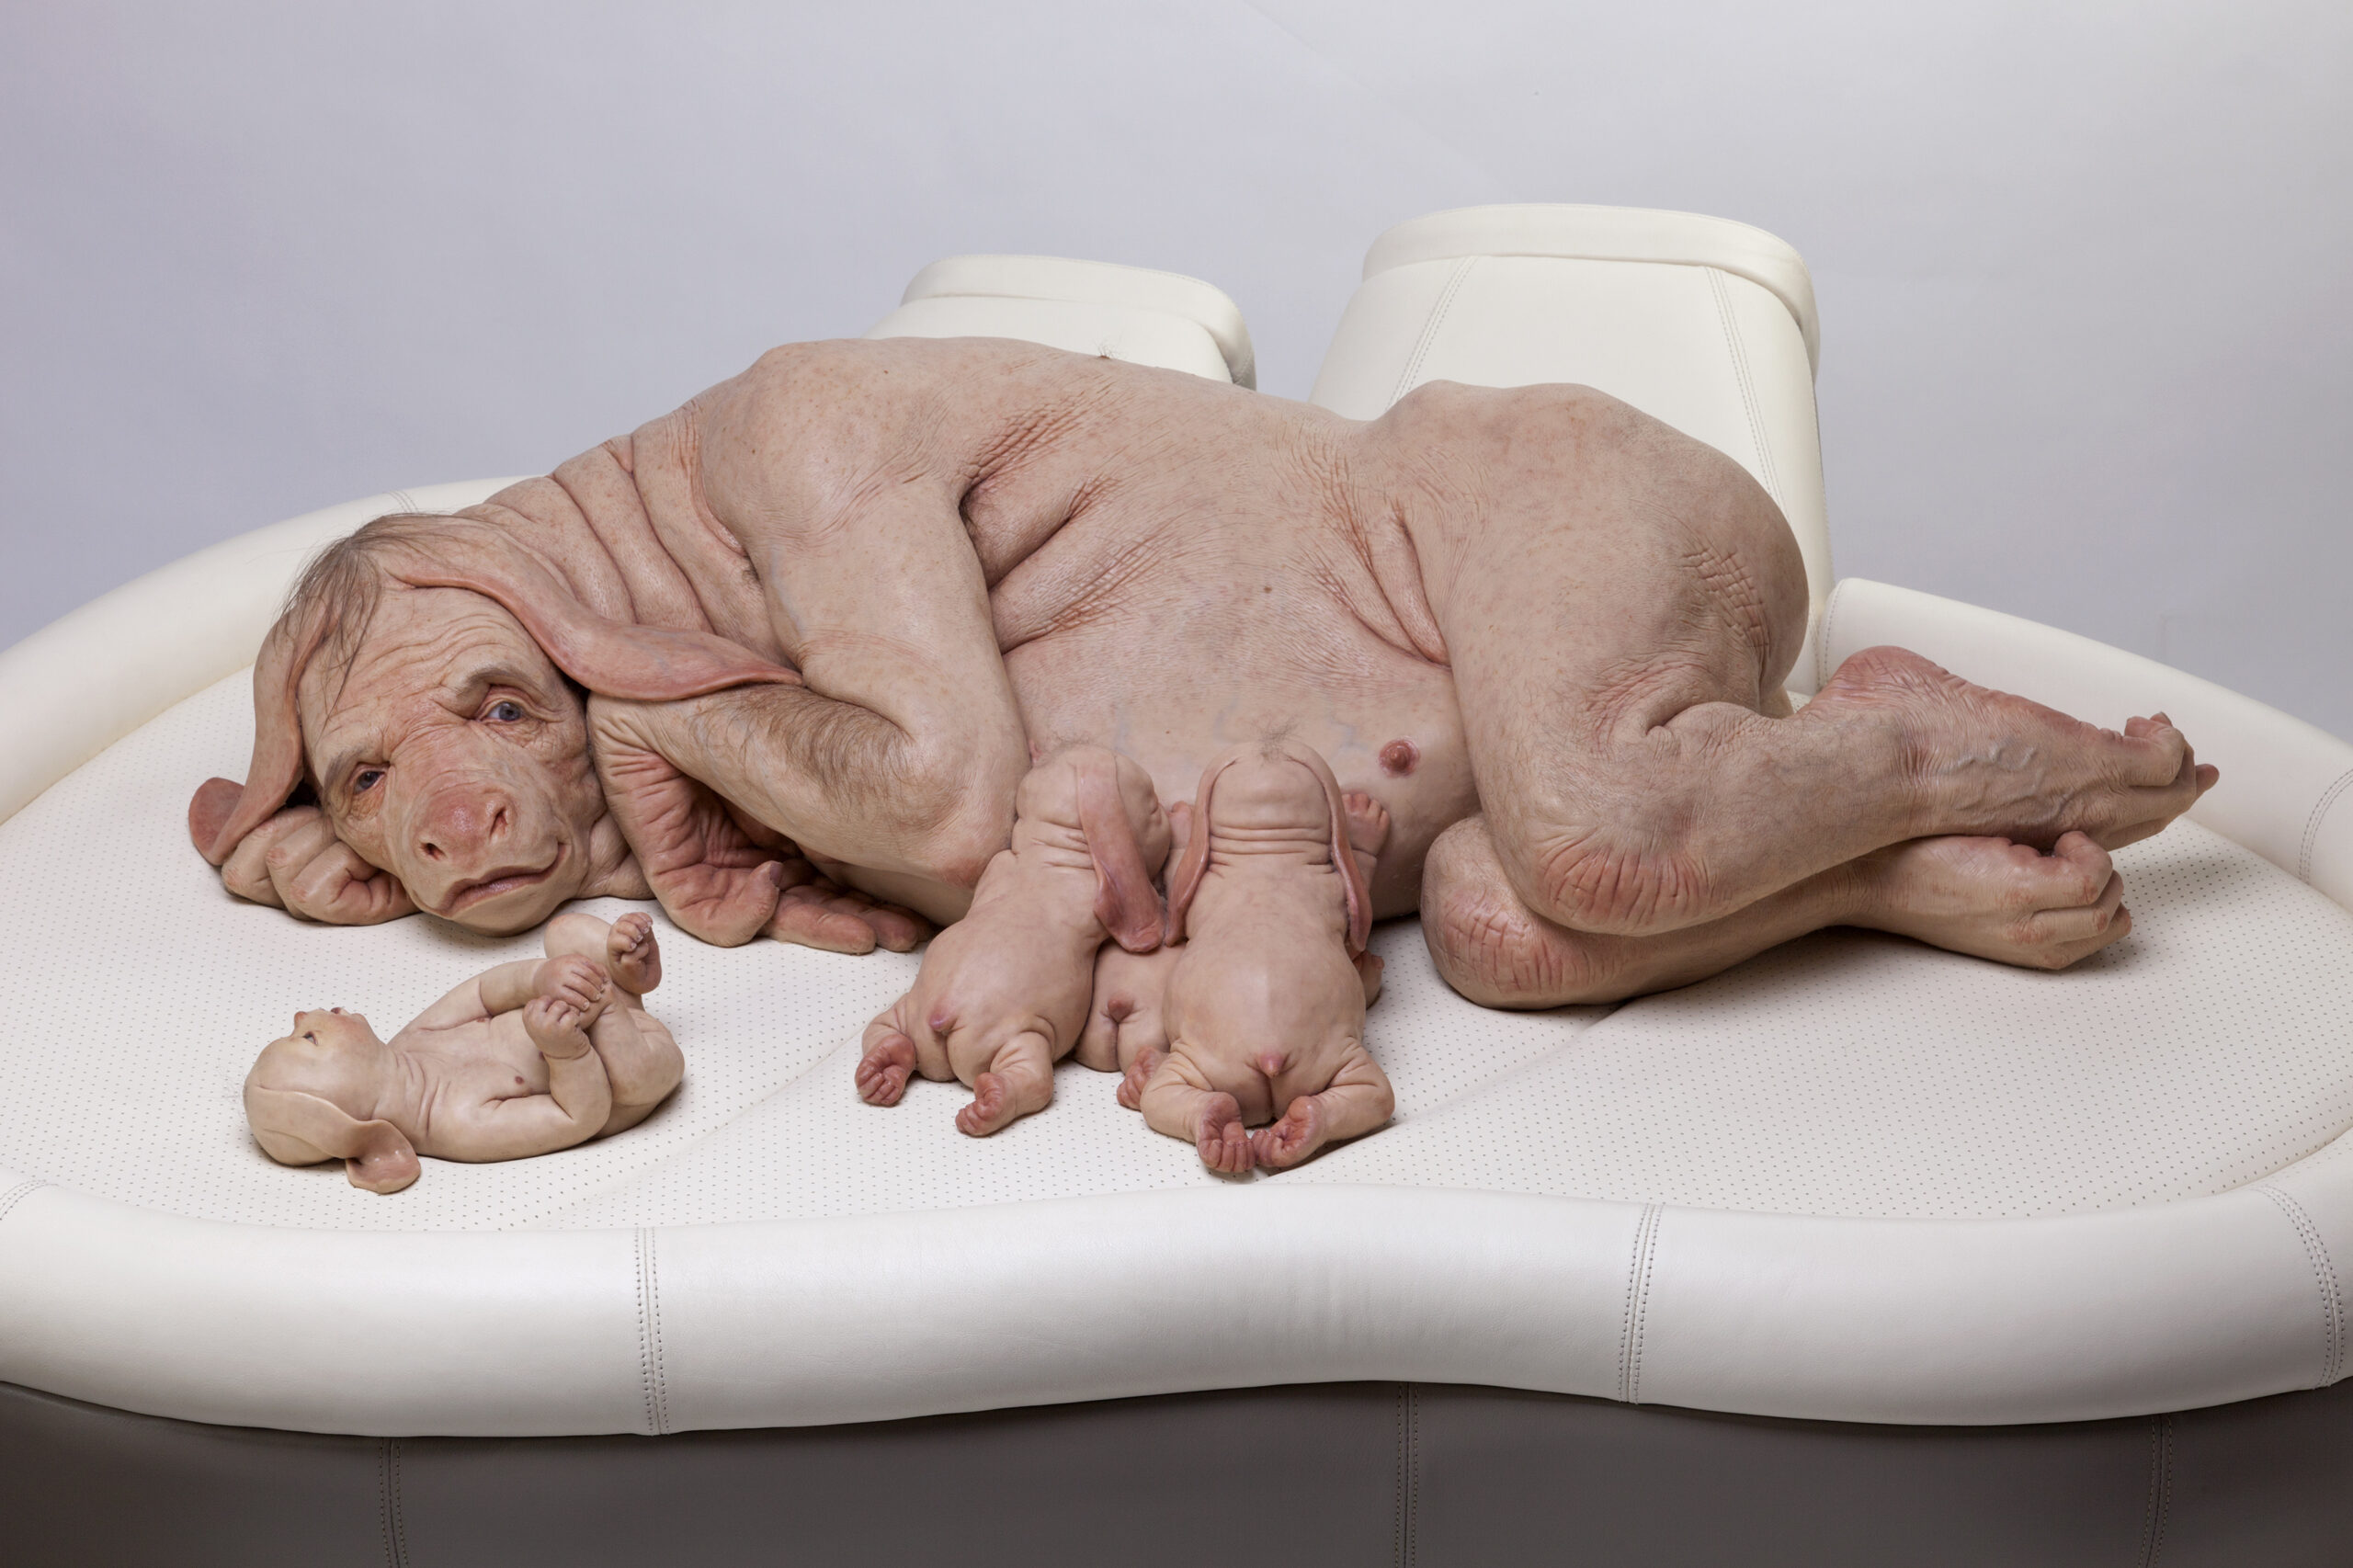 https://csw.torun.pl/wp-content/uploads/2021/09/Patricia-Piccinini-The-Young-Family-2002.-Photo-Graham-Baring.-Courtesy-of-the-artist-scaled.jpg